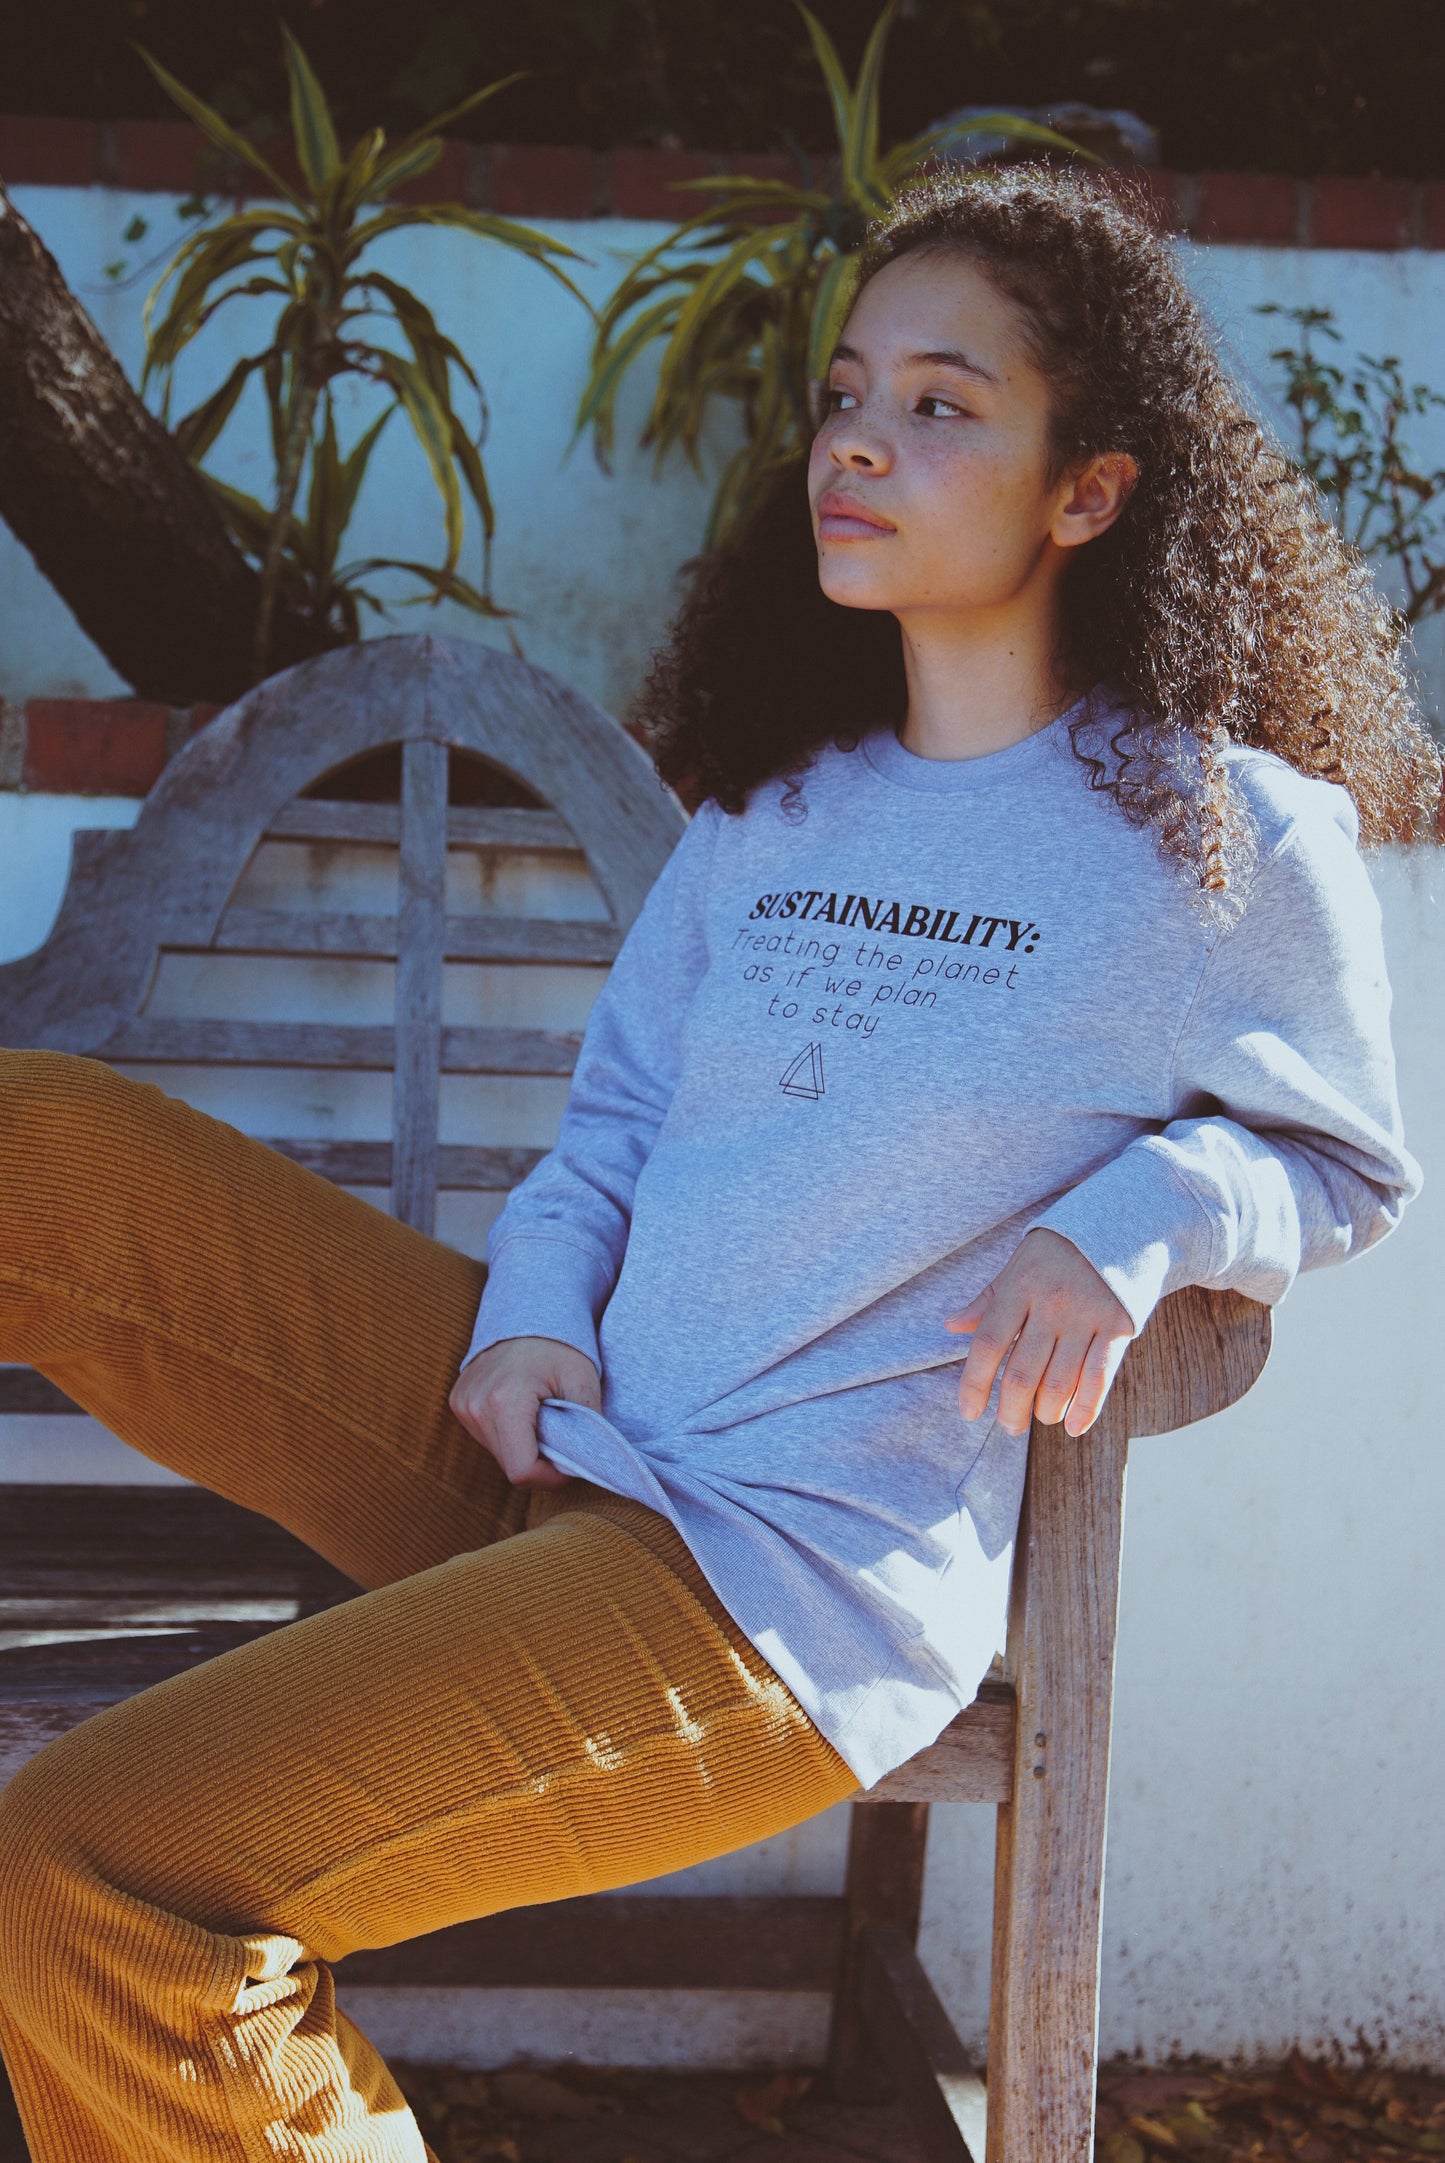 Organic cotton clothes for women, Organic Cotton Clothing for Women, Organic Cotton Tank Tops, Cotton Organic T Shirts, Organic Cotton T Shirt, Band Tees, Vintage Tees, Rolling Stones Bomber Jacket, Stoned Girls, She's a rainbow, Environmental Slogan Tshirt, Environmental Slogan Tee